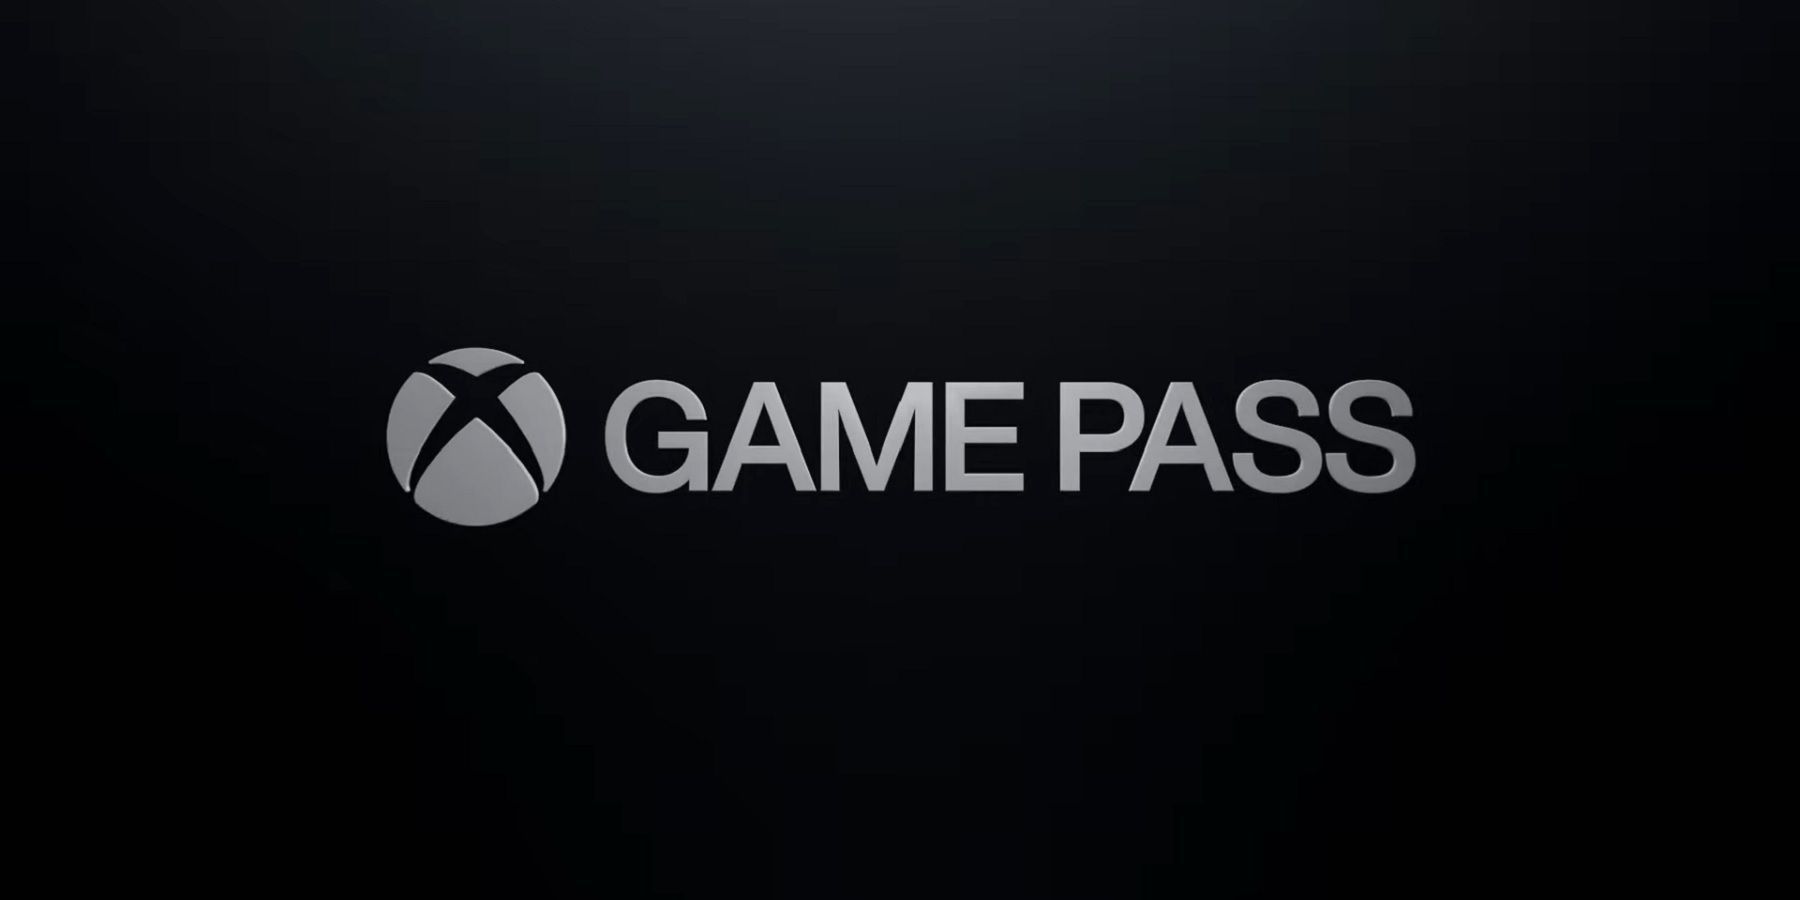 Coming Soon to Xbox Game Pass: FIFA 23, Planet of Lana, Railway Empire 2,  and More - Xbox Wire